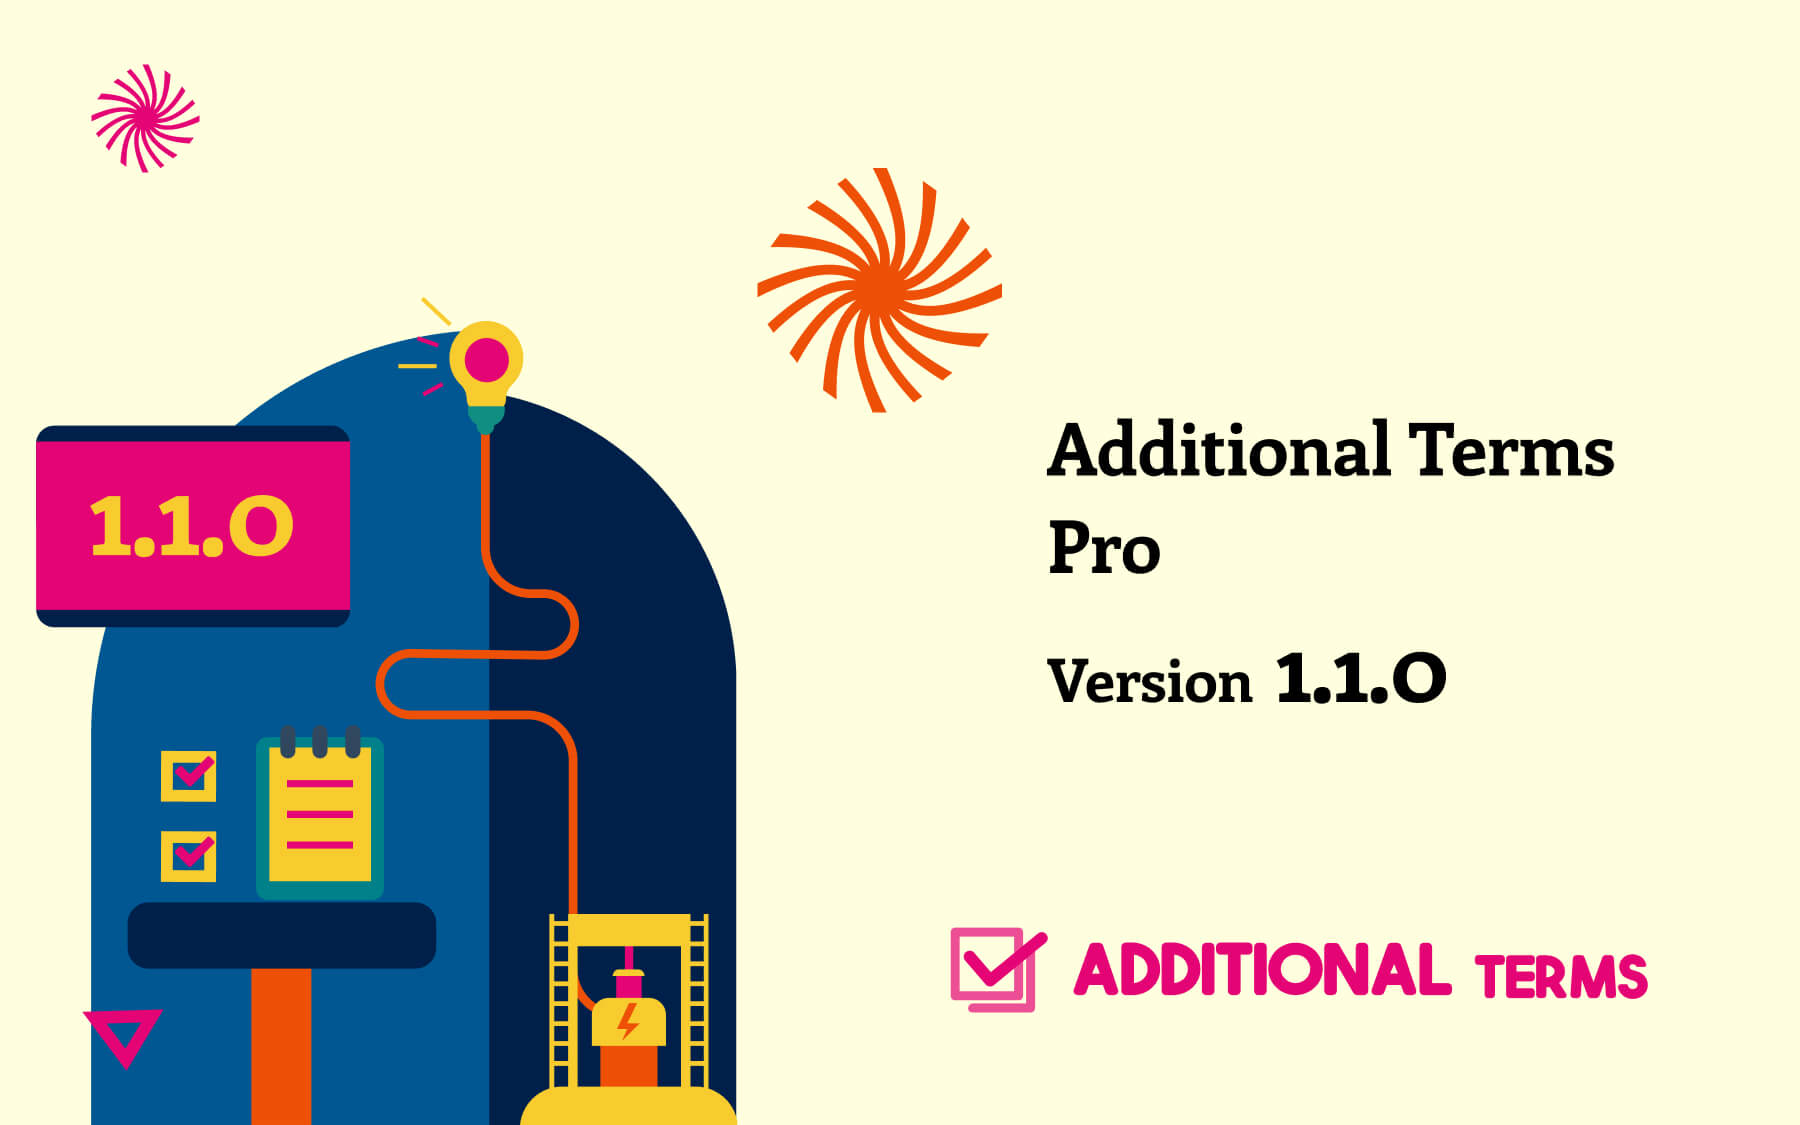 Introducing Additional Terms Pro 1.1.0